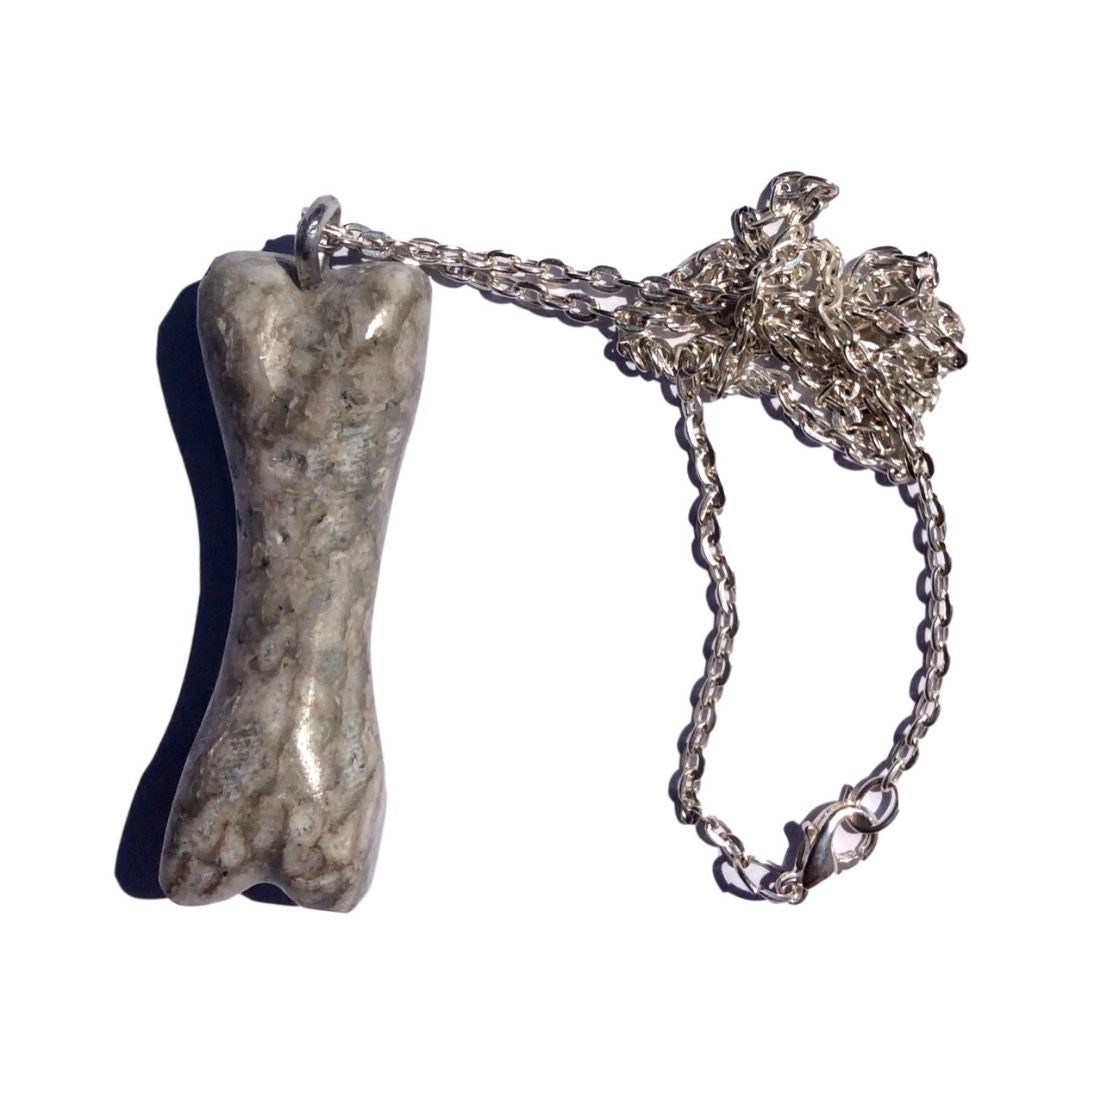 Dog Bone-Shaped Charm Necklace Made of REAL Fossil Dinosaur Bone - Perfect Father’s Day Gift